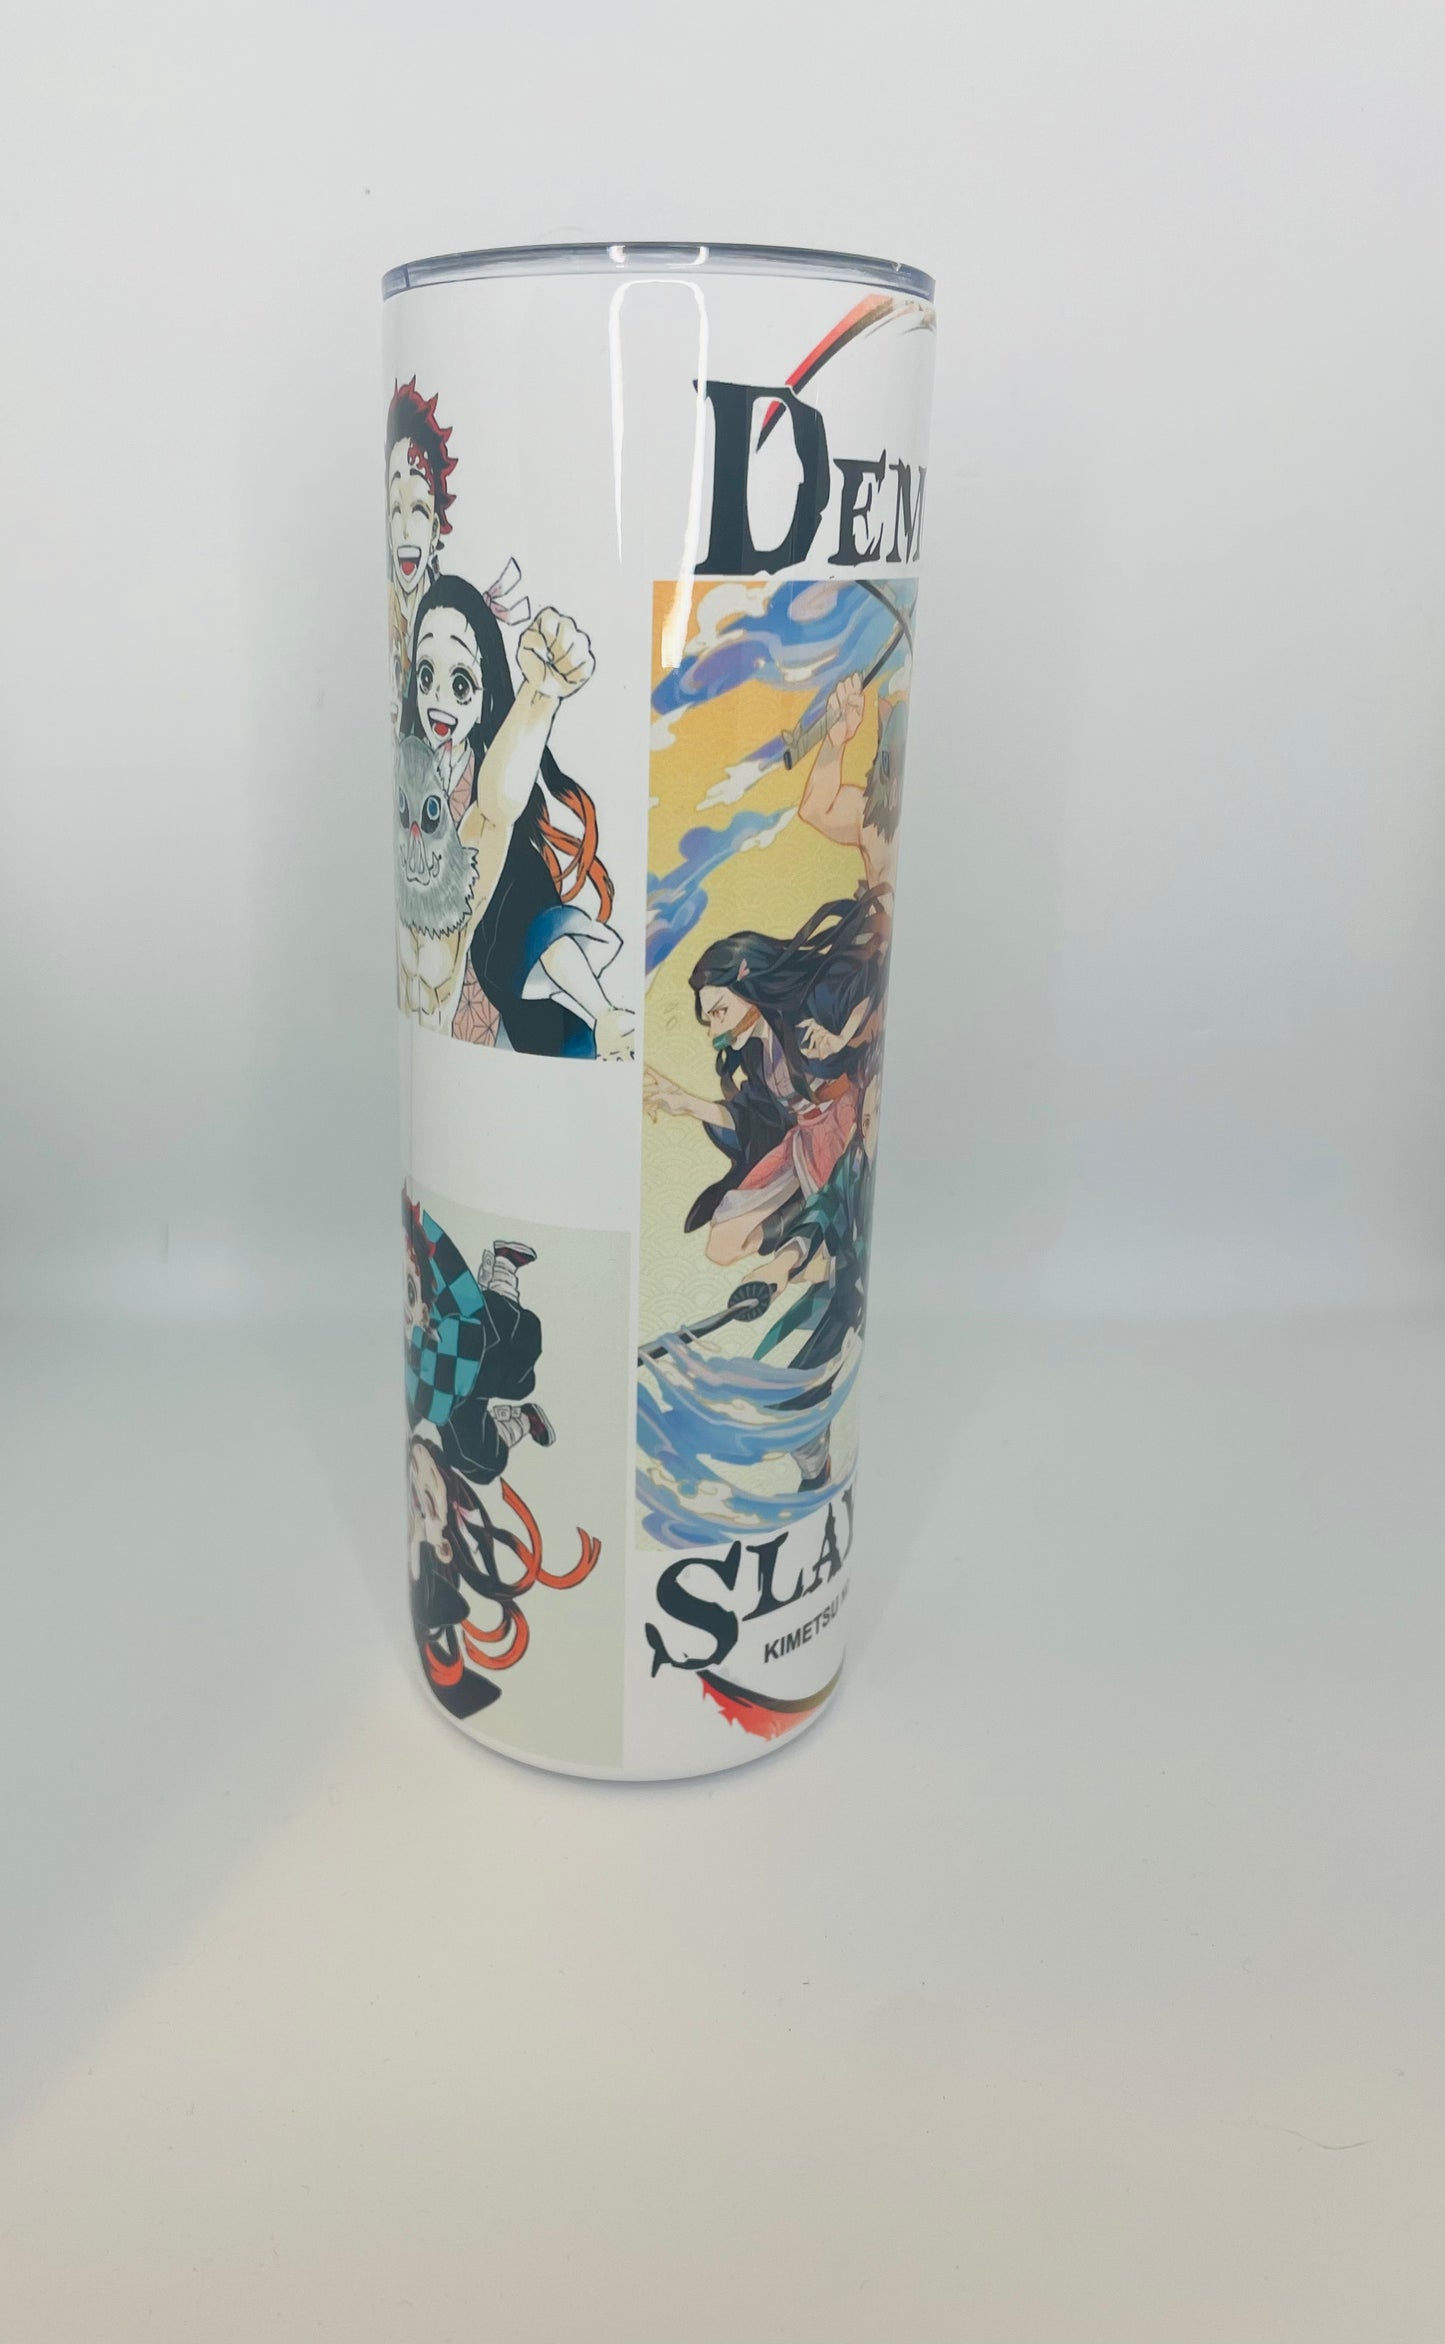 Personalized Tumblers, Personalized Cups, Anime, Demon Slayer, Demon Slayer Customized Tumblers, Demon Slayer Cup, Coffee Cups, Tumblers, Unique Gifts, Personalized Gifts